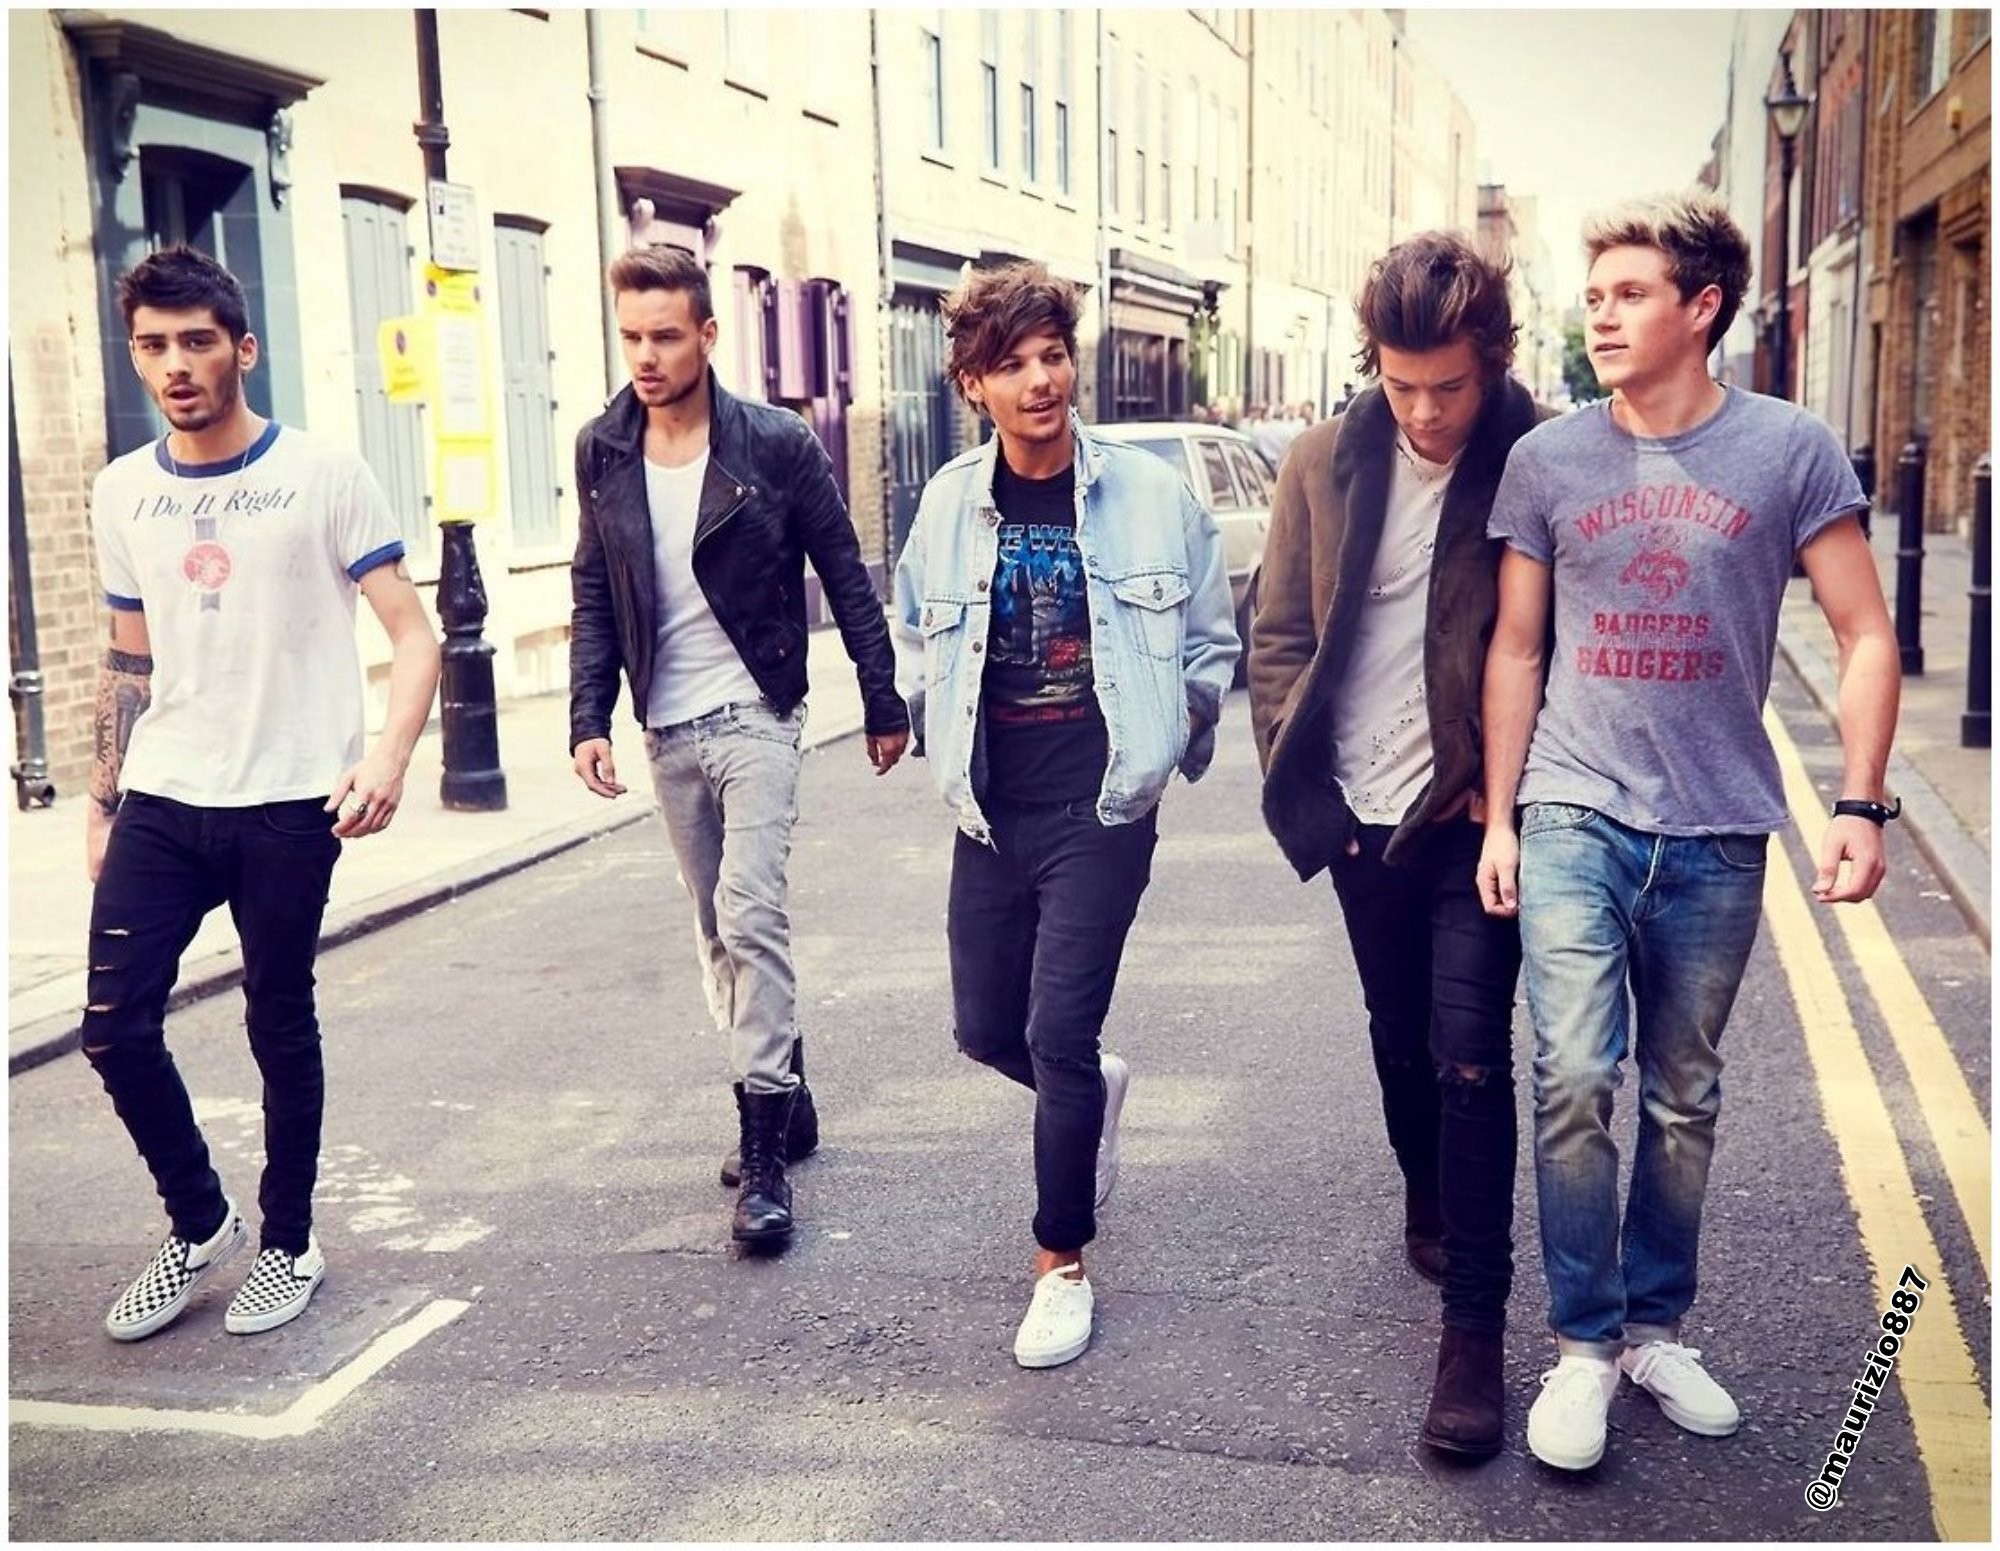 2000x1551 Get 2013 One Direction Â· One Direction Midnight Memories 2013 - One  Direction Photo (36070364 ...